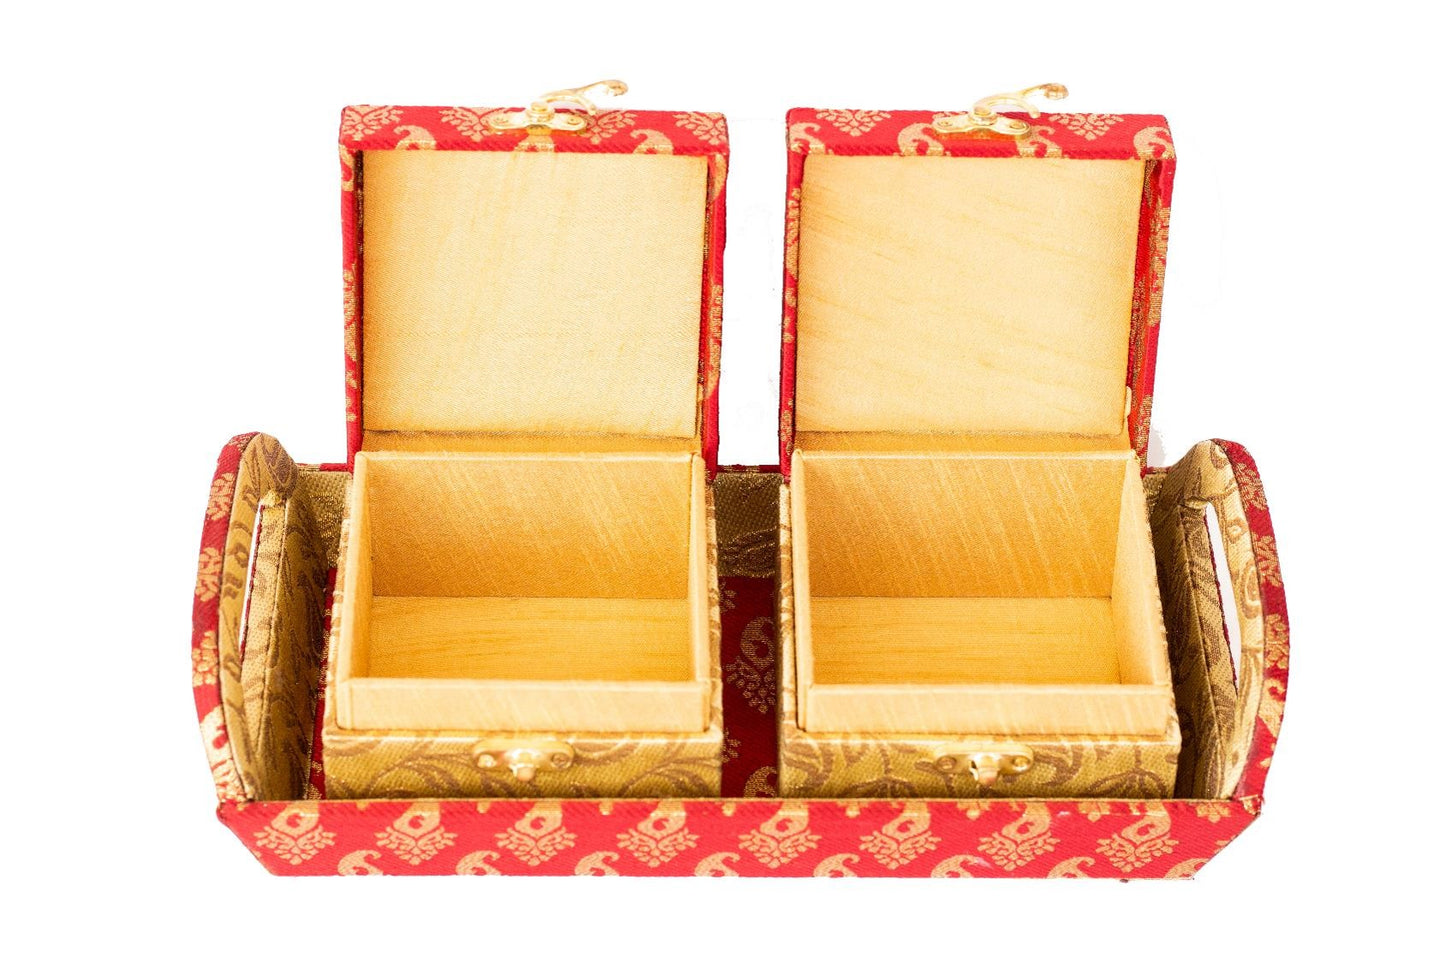 Opulent Homes Tray with 2 Boxes